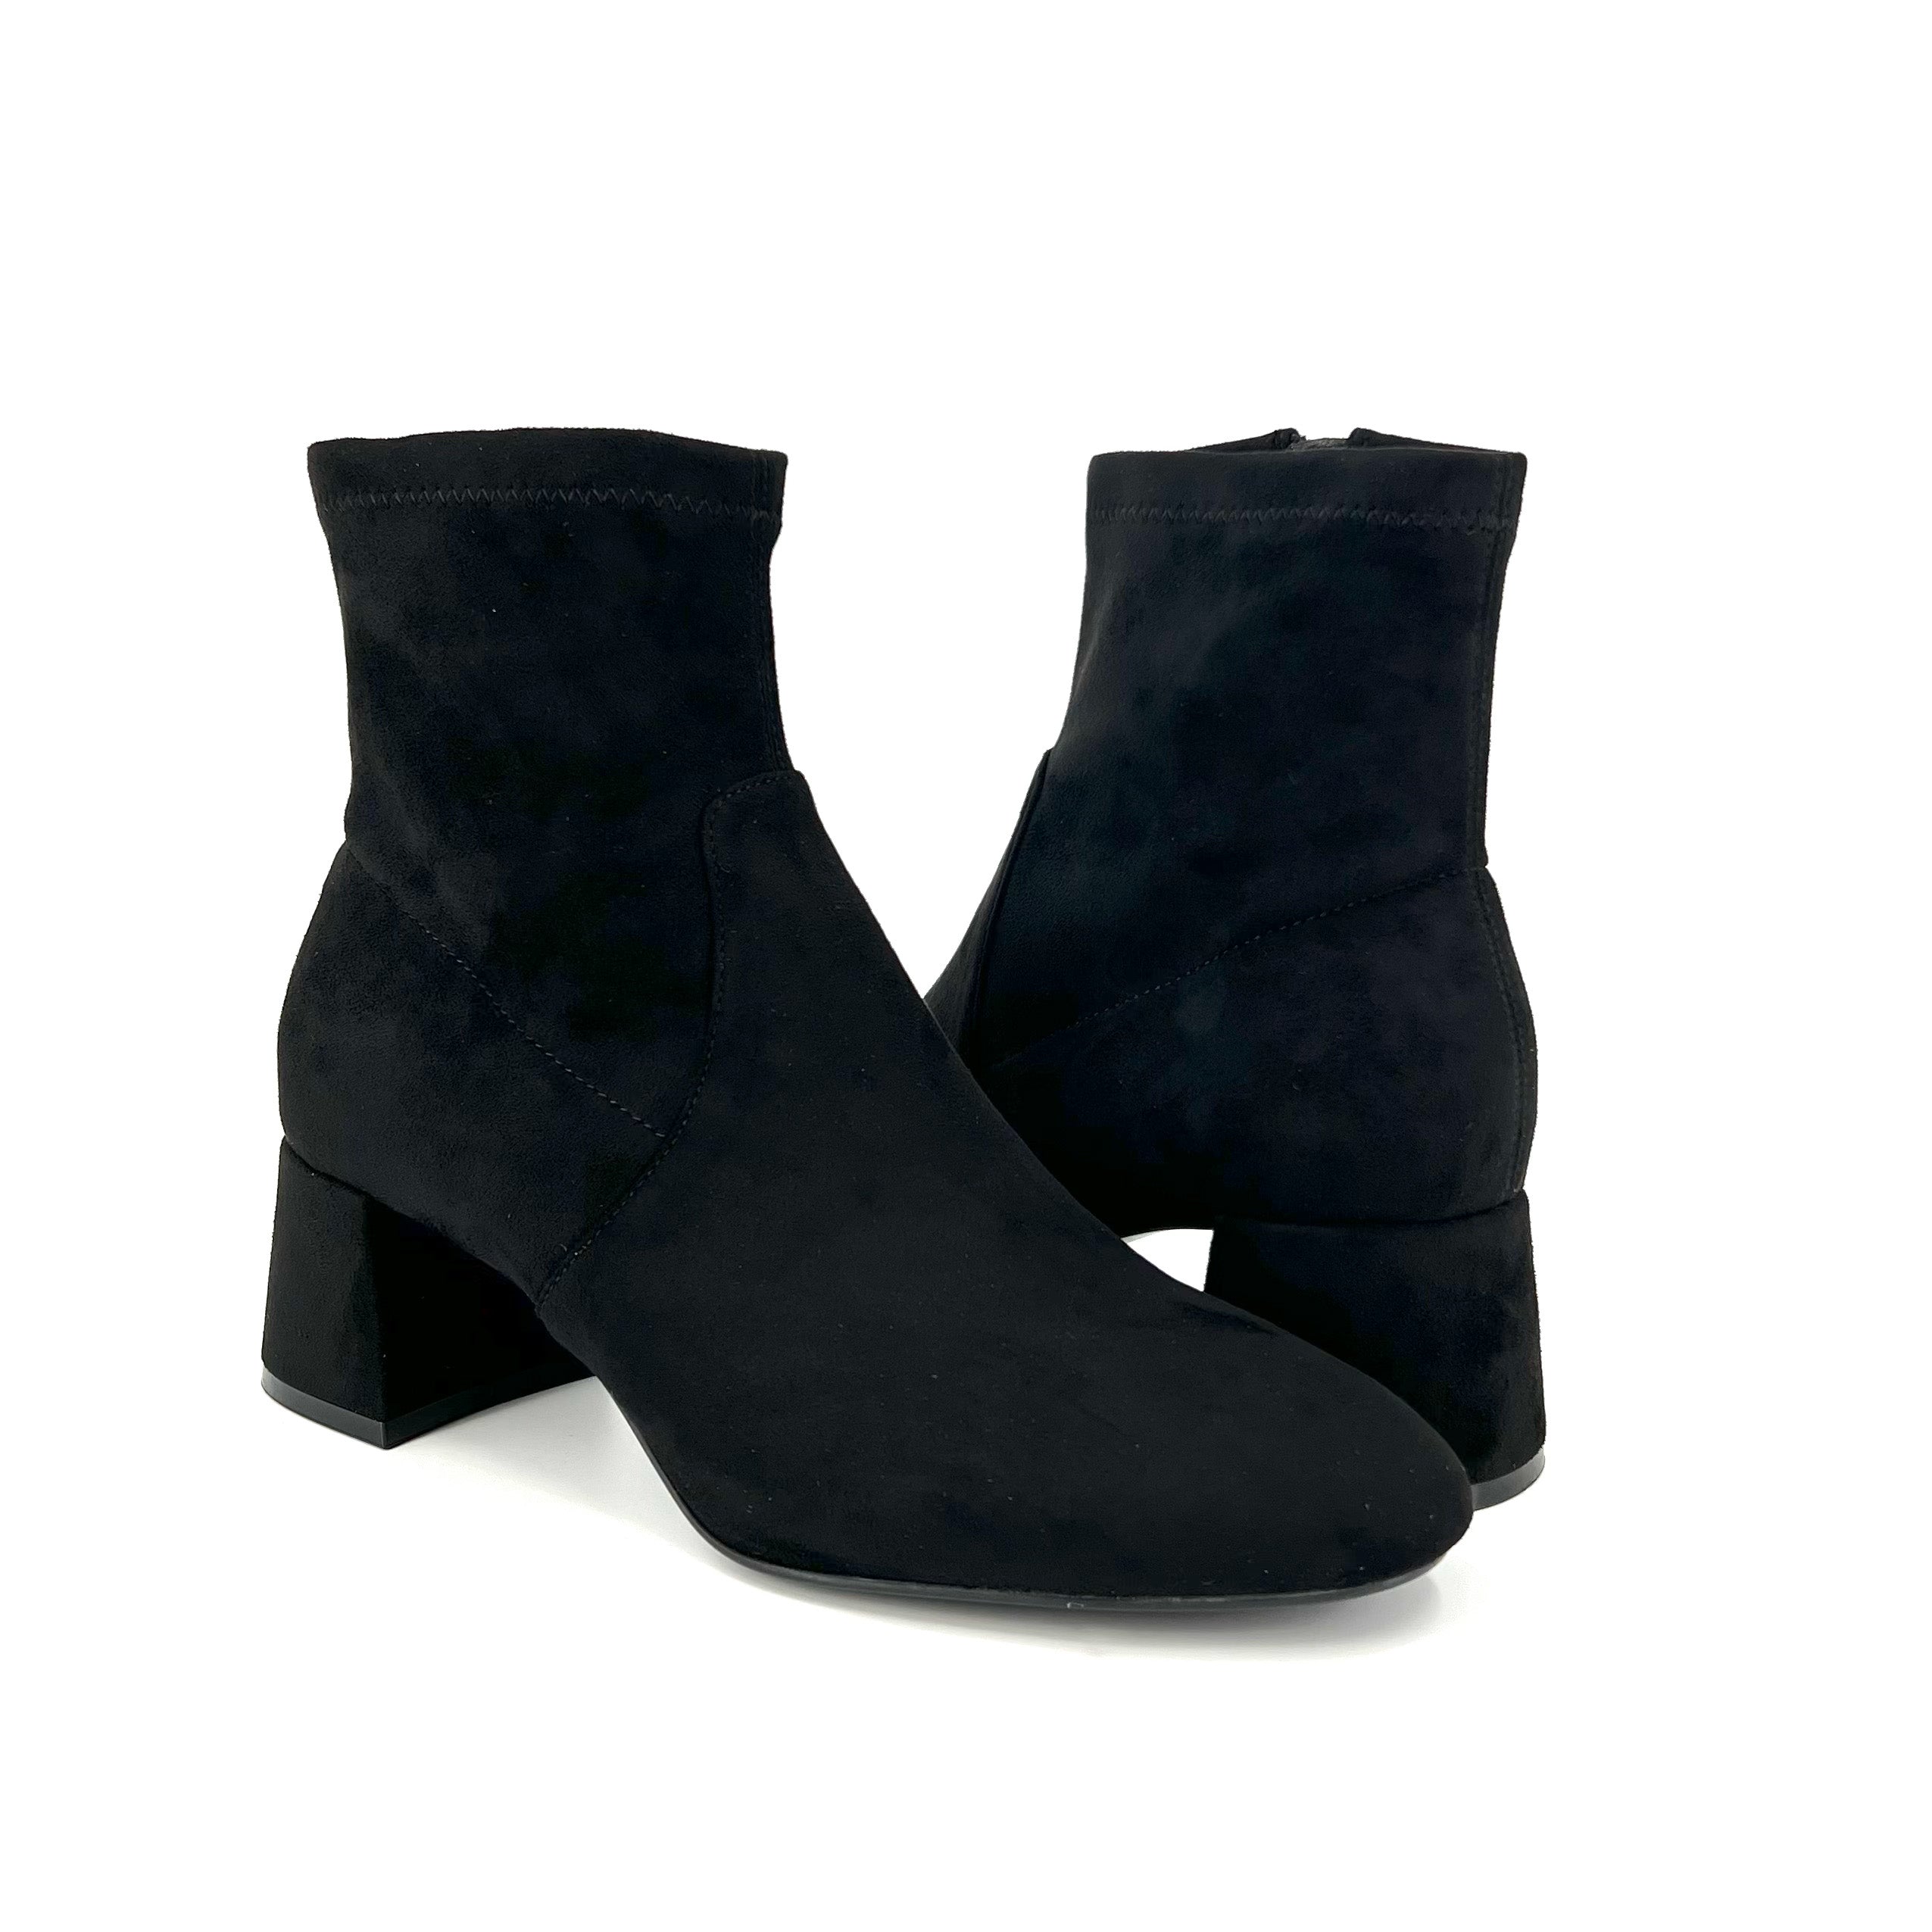 The Stretch Bootie with Inside Zip in Black